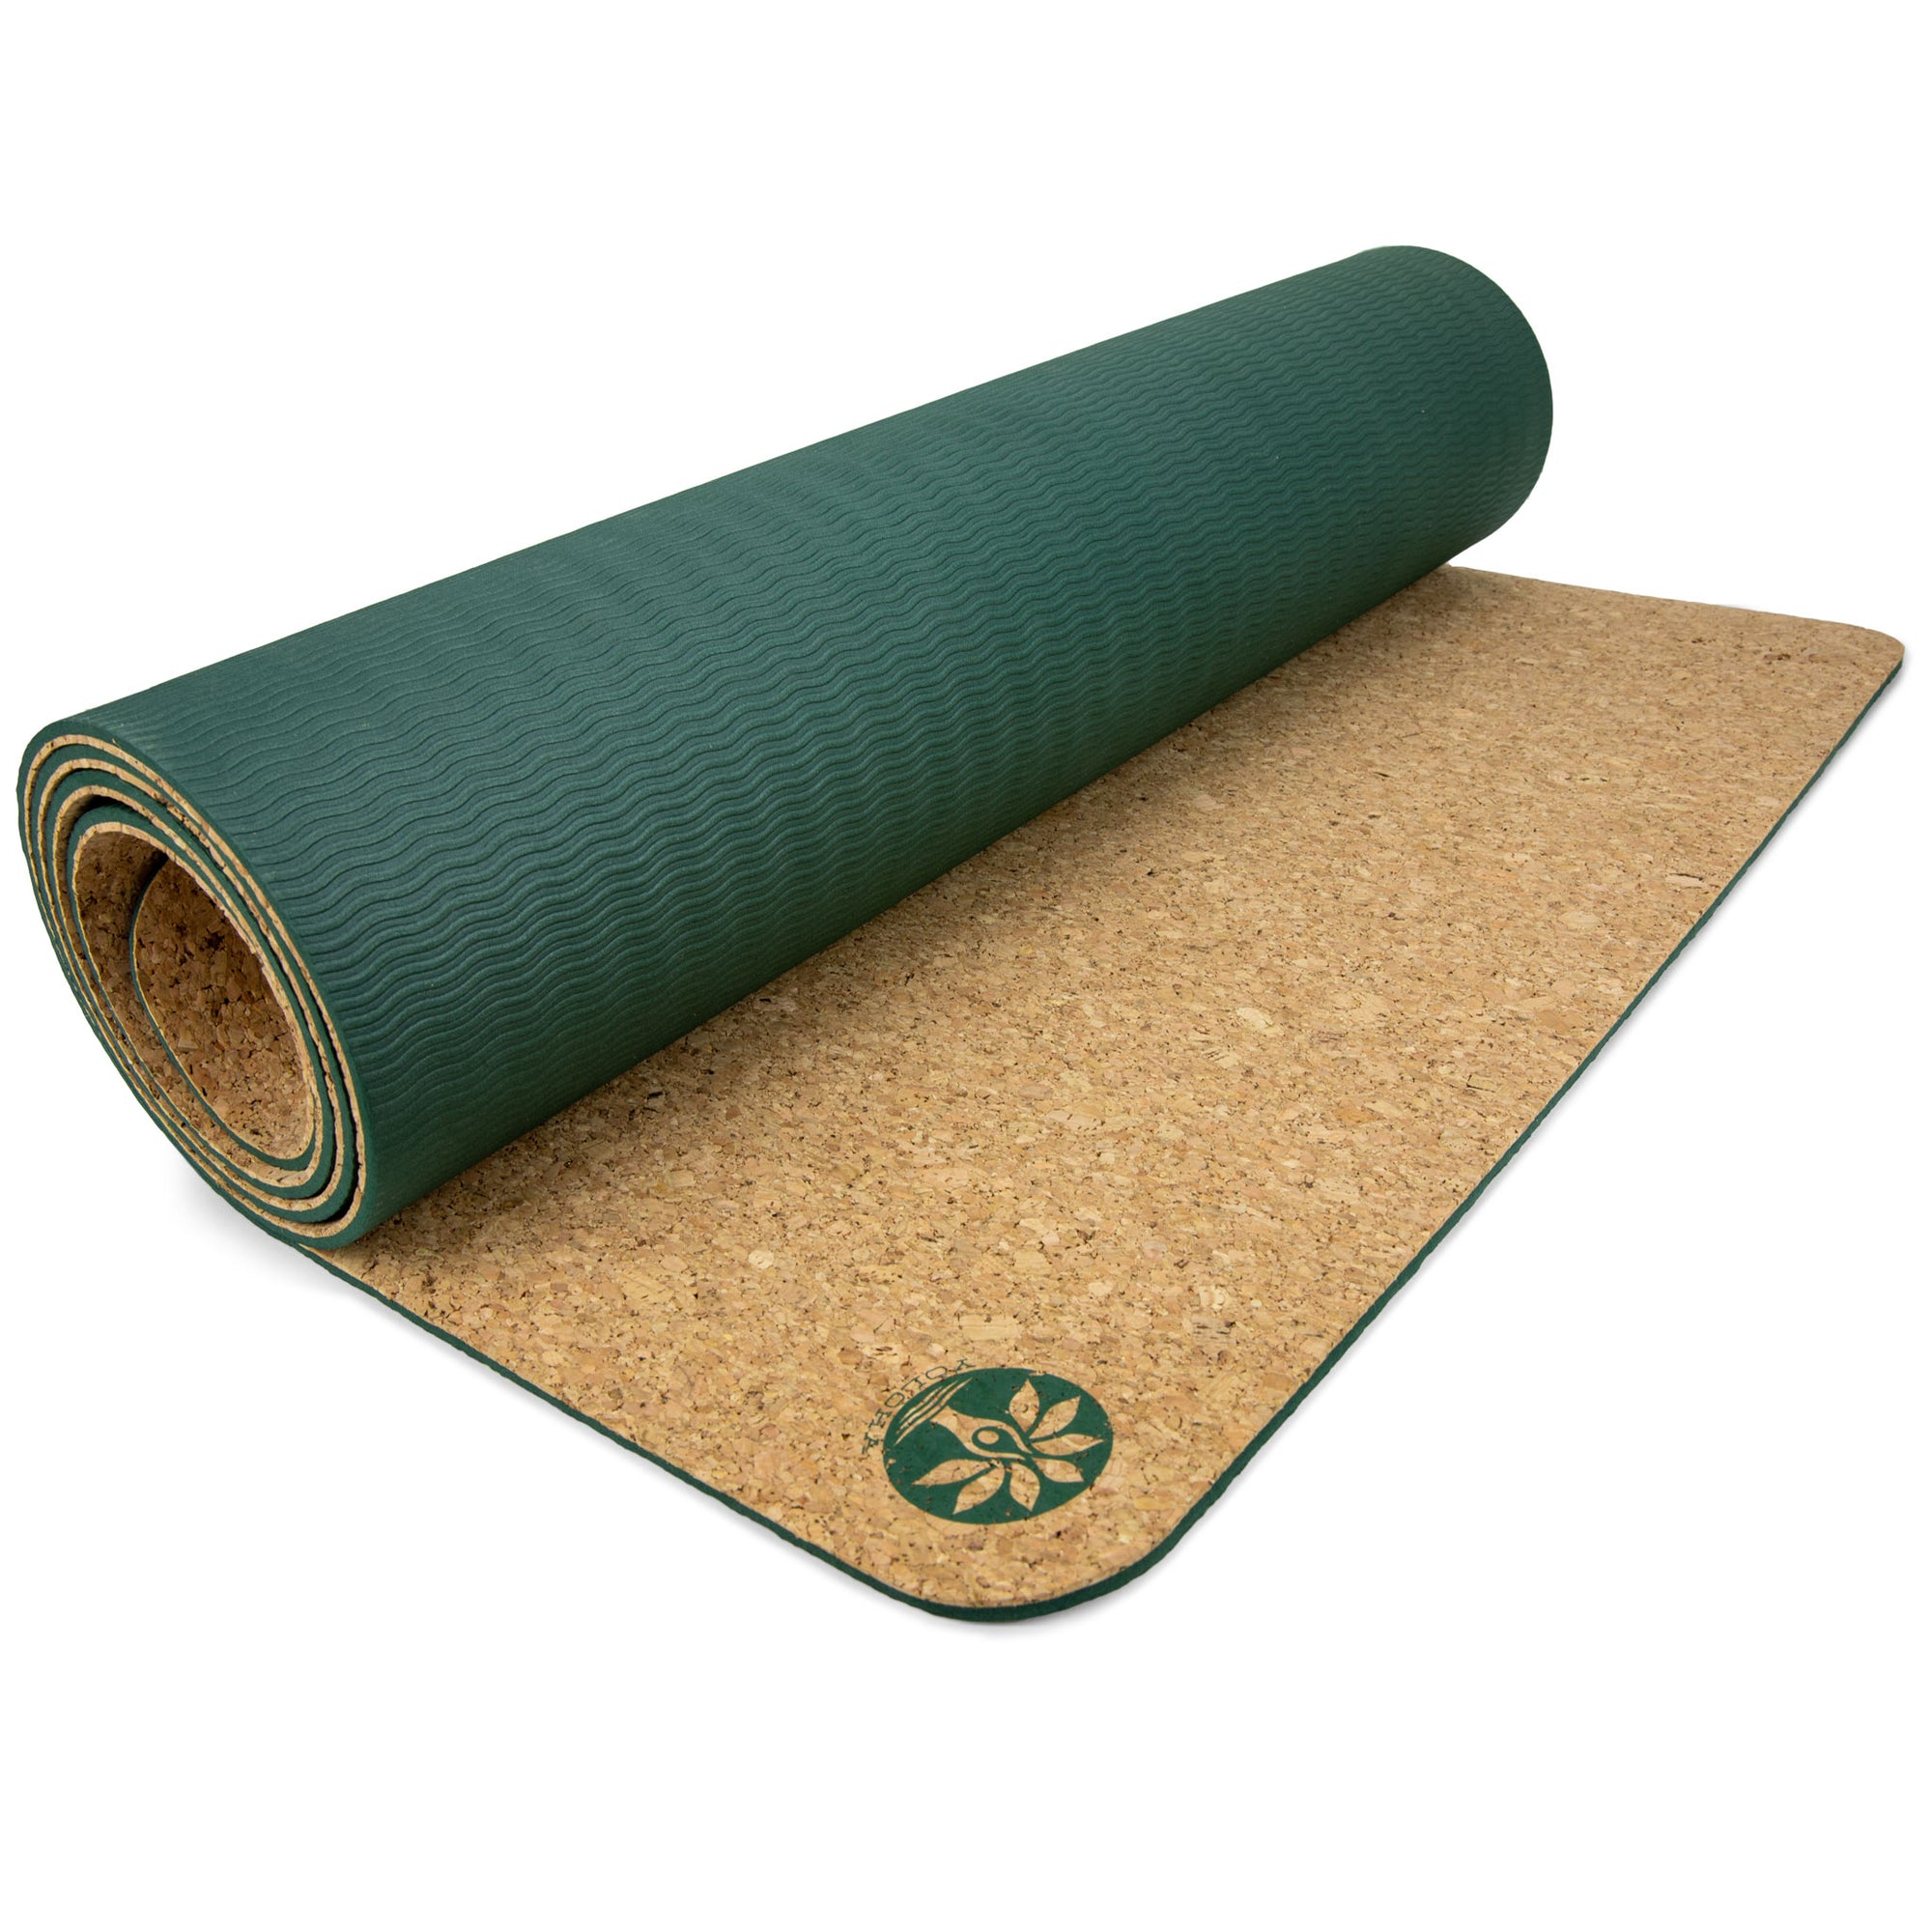 Best Yoga Mats for better grip, support and comfort